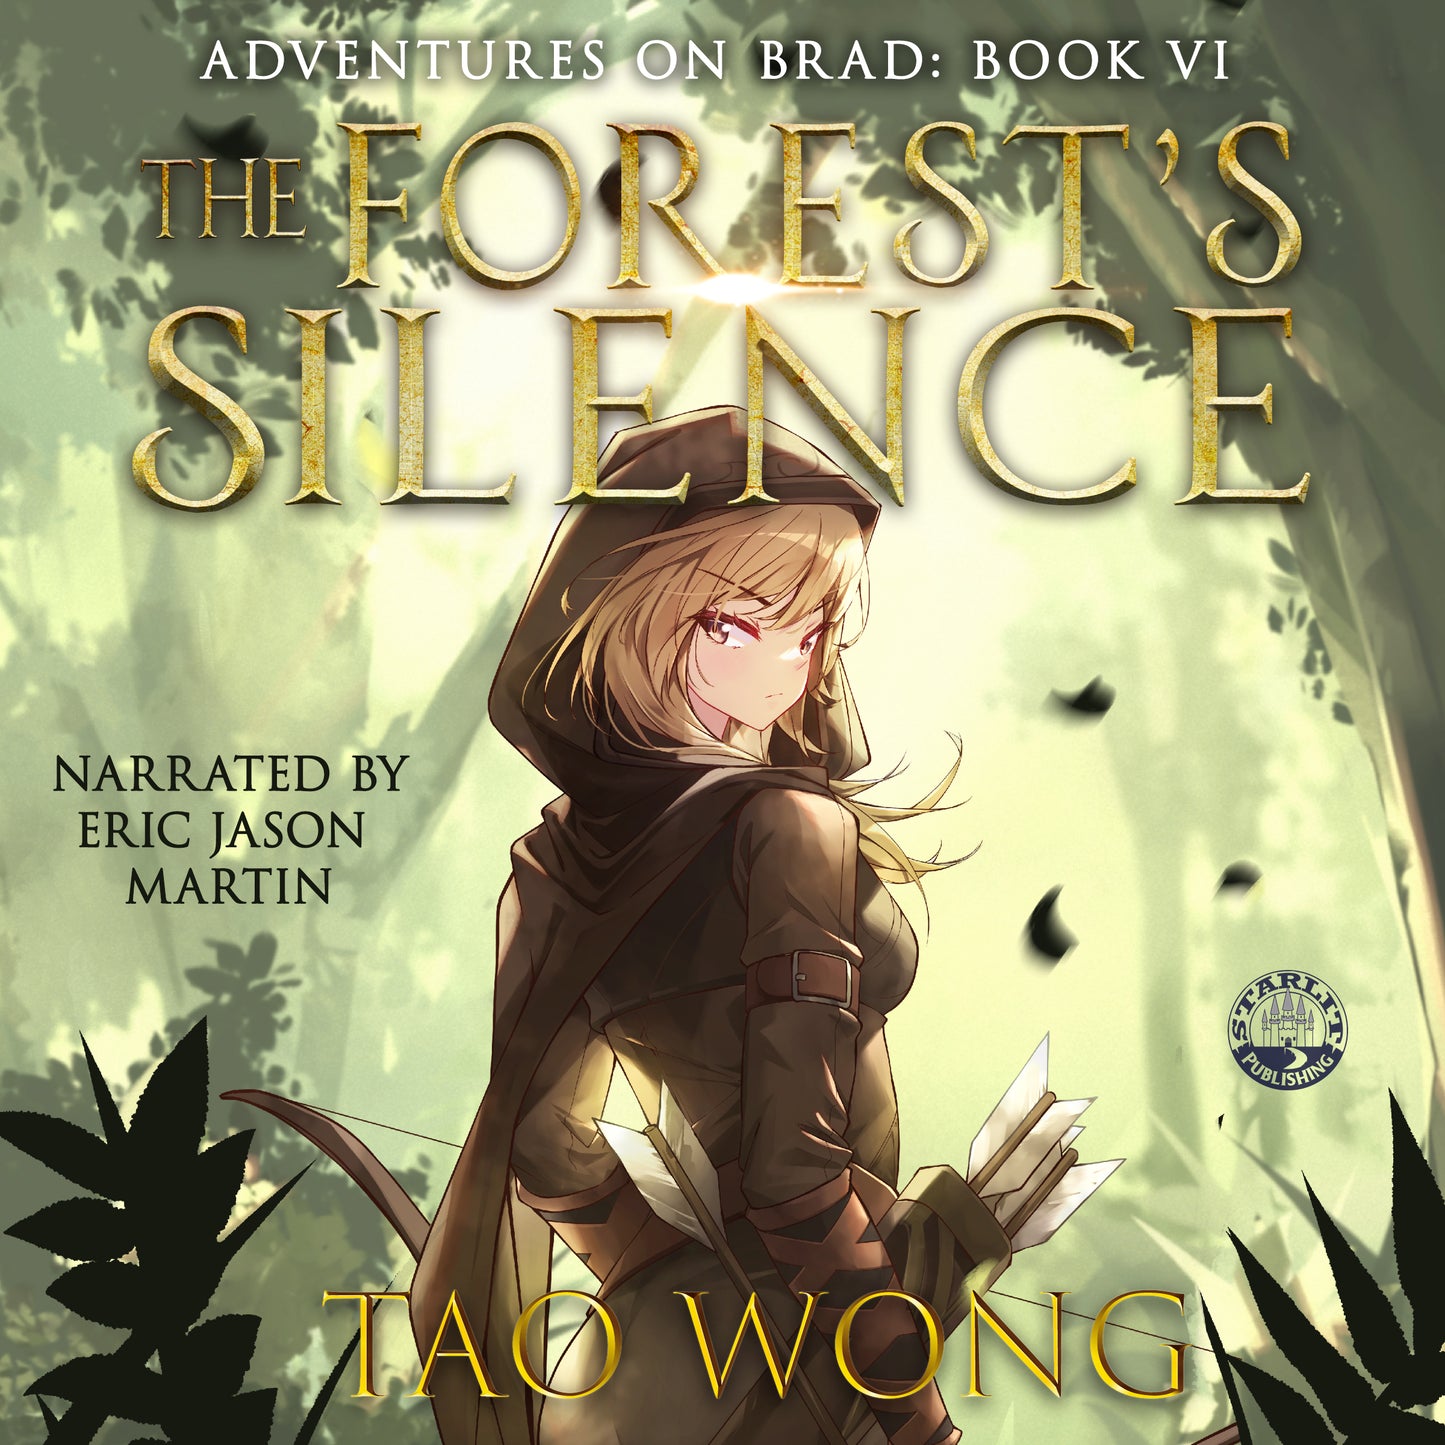 The Forest’s Silence (Adventures on Brad #6)